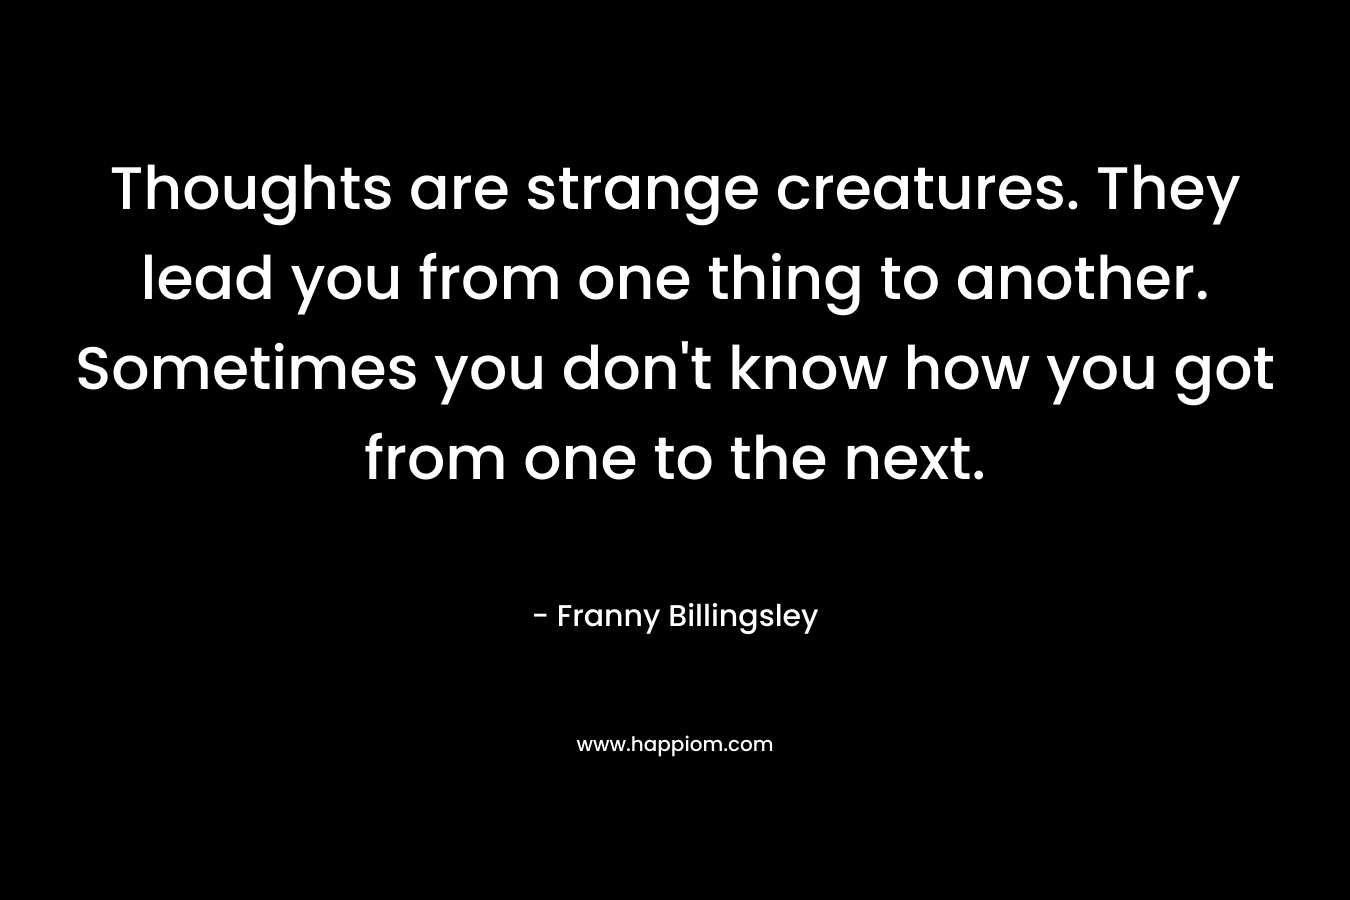 Thoughts are strange creatures. They lead you from one thing to another. Sometimes you don't know how you got from one to the next.